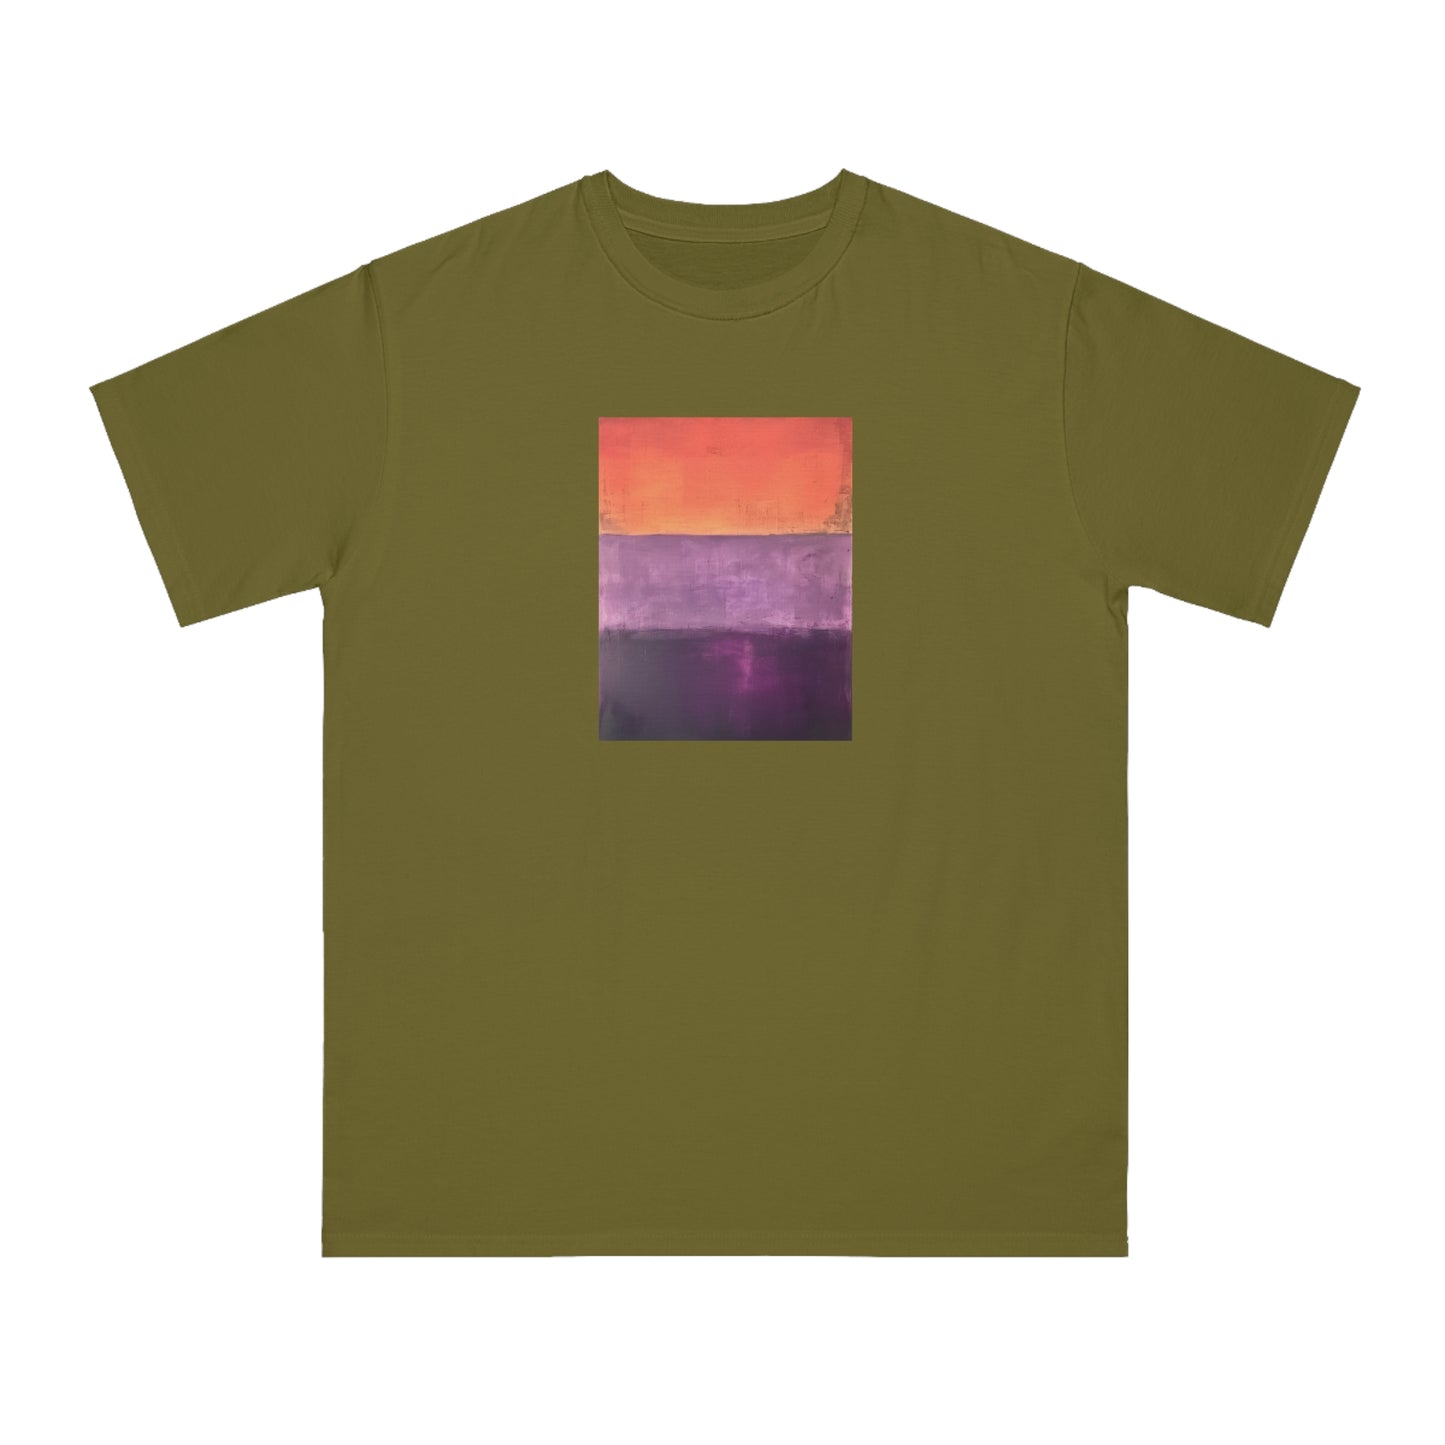 a green t - shirt with an orange and purple painting on it